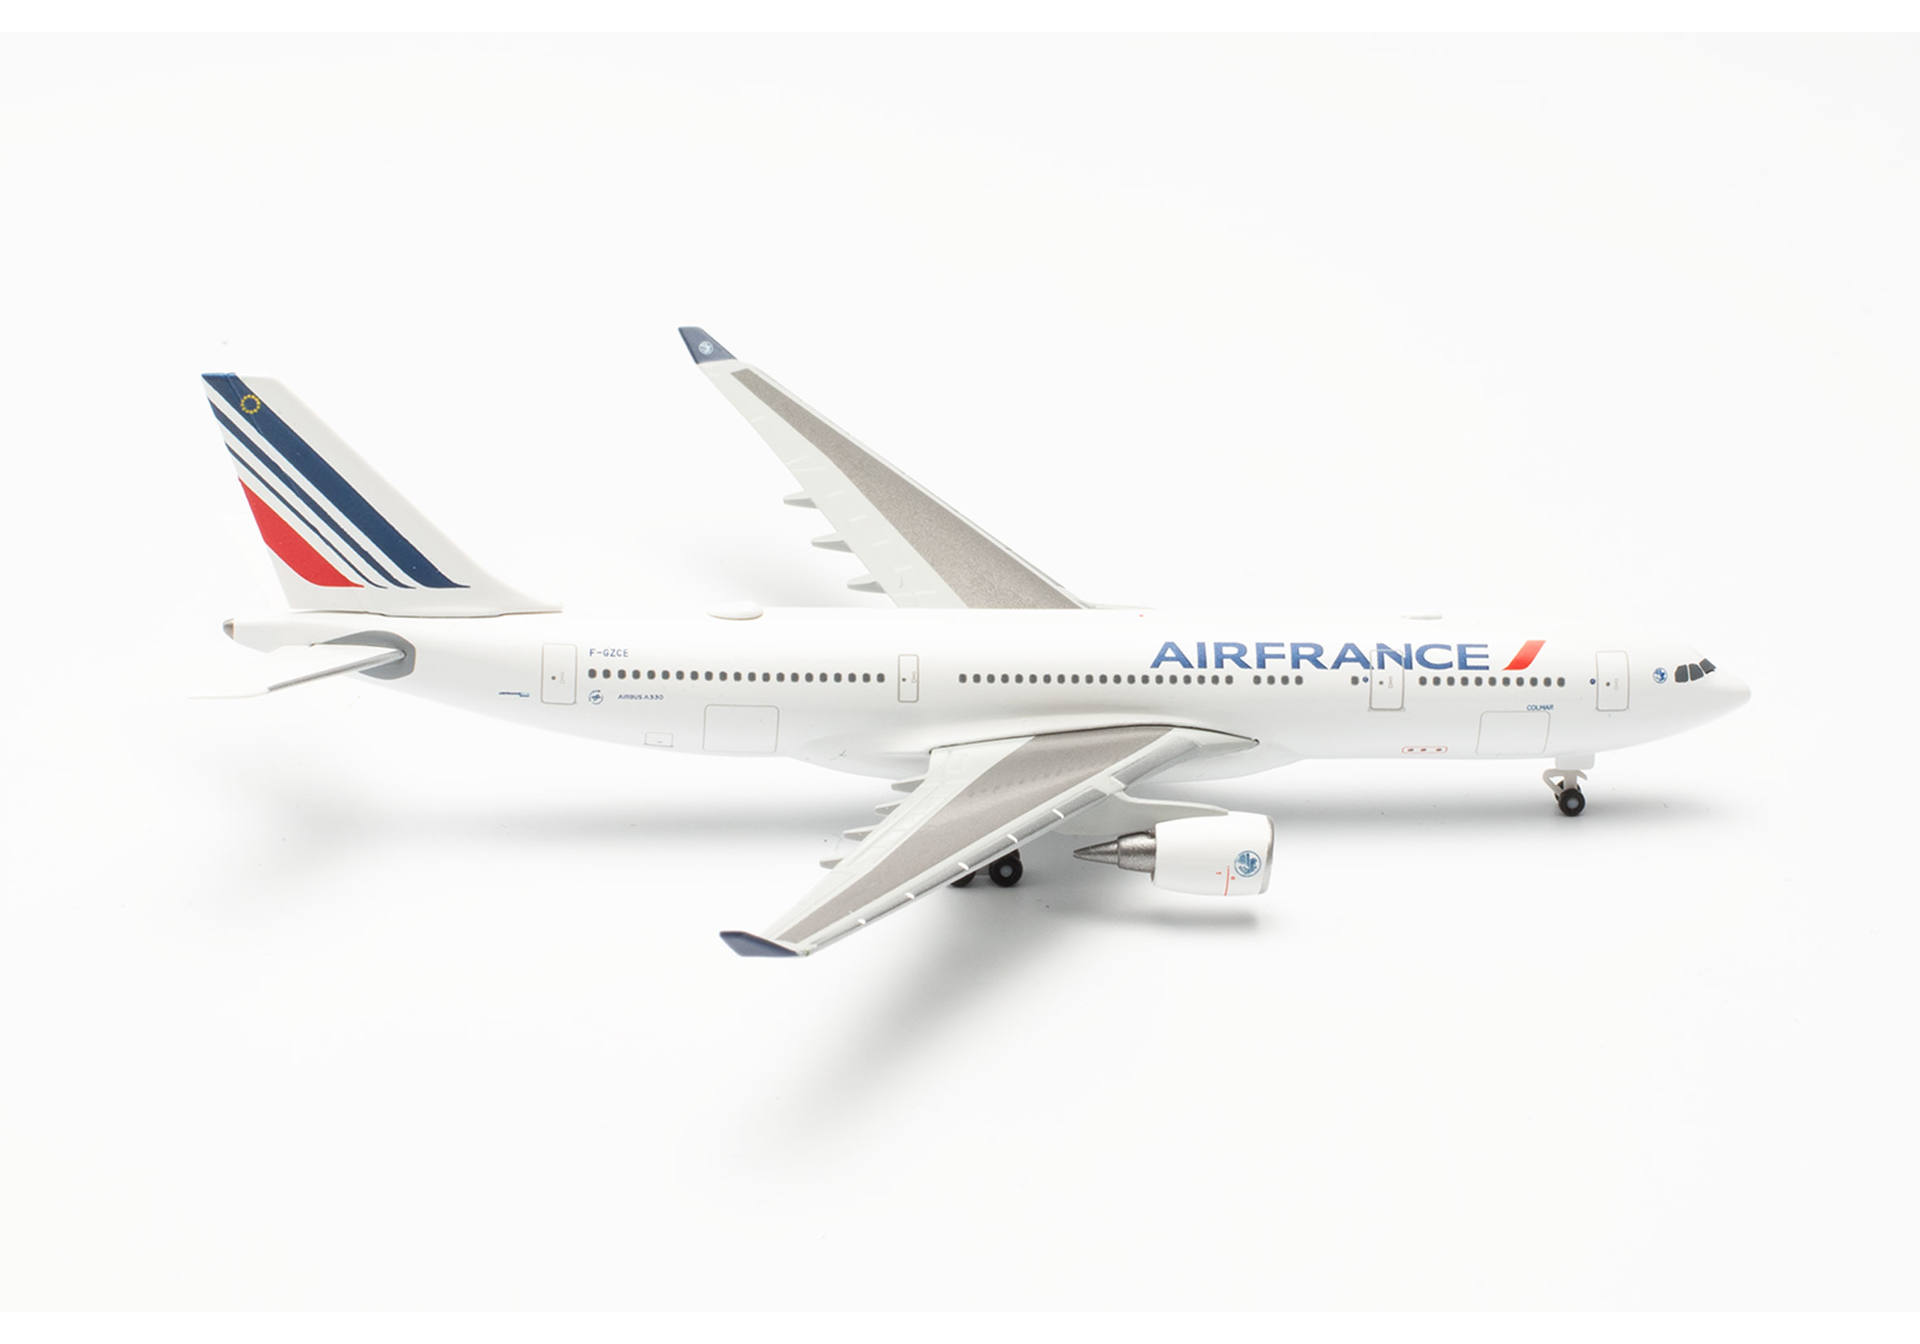 Air France Airbus A330-200 (new colors) - F-GCZE "Colmar"